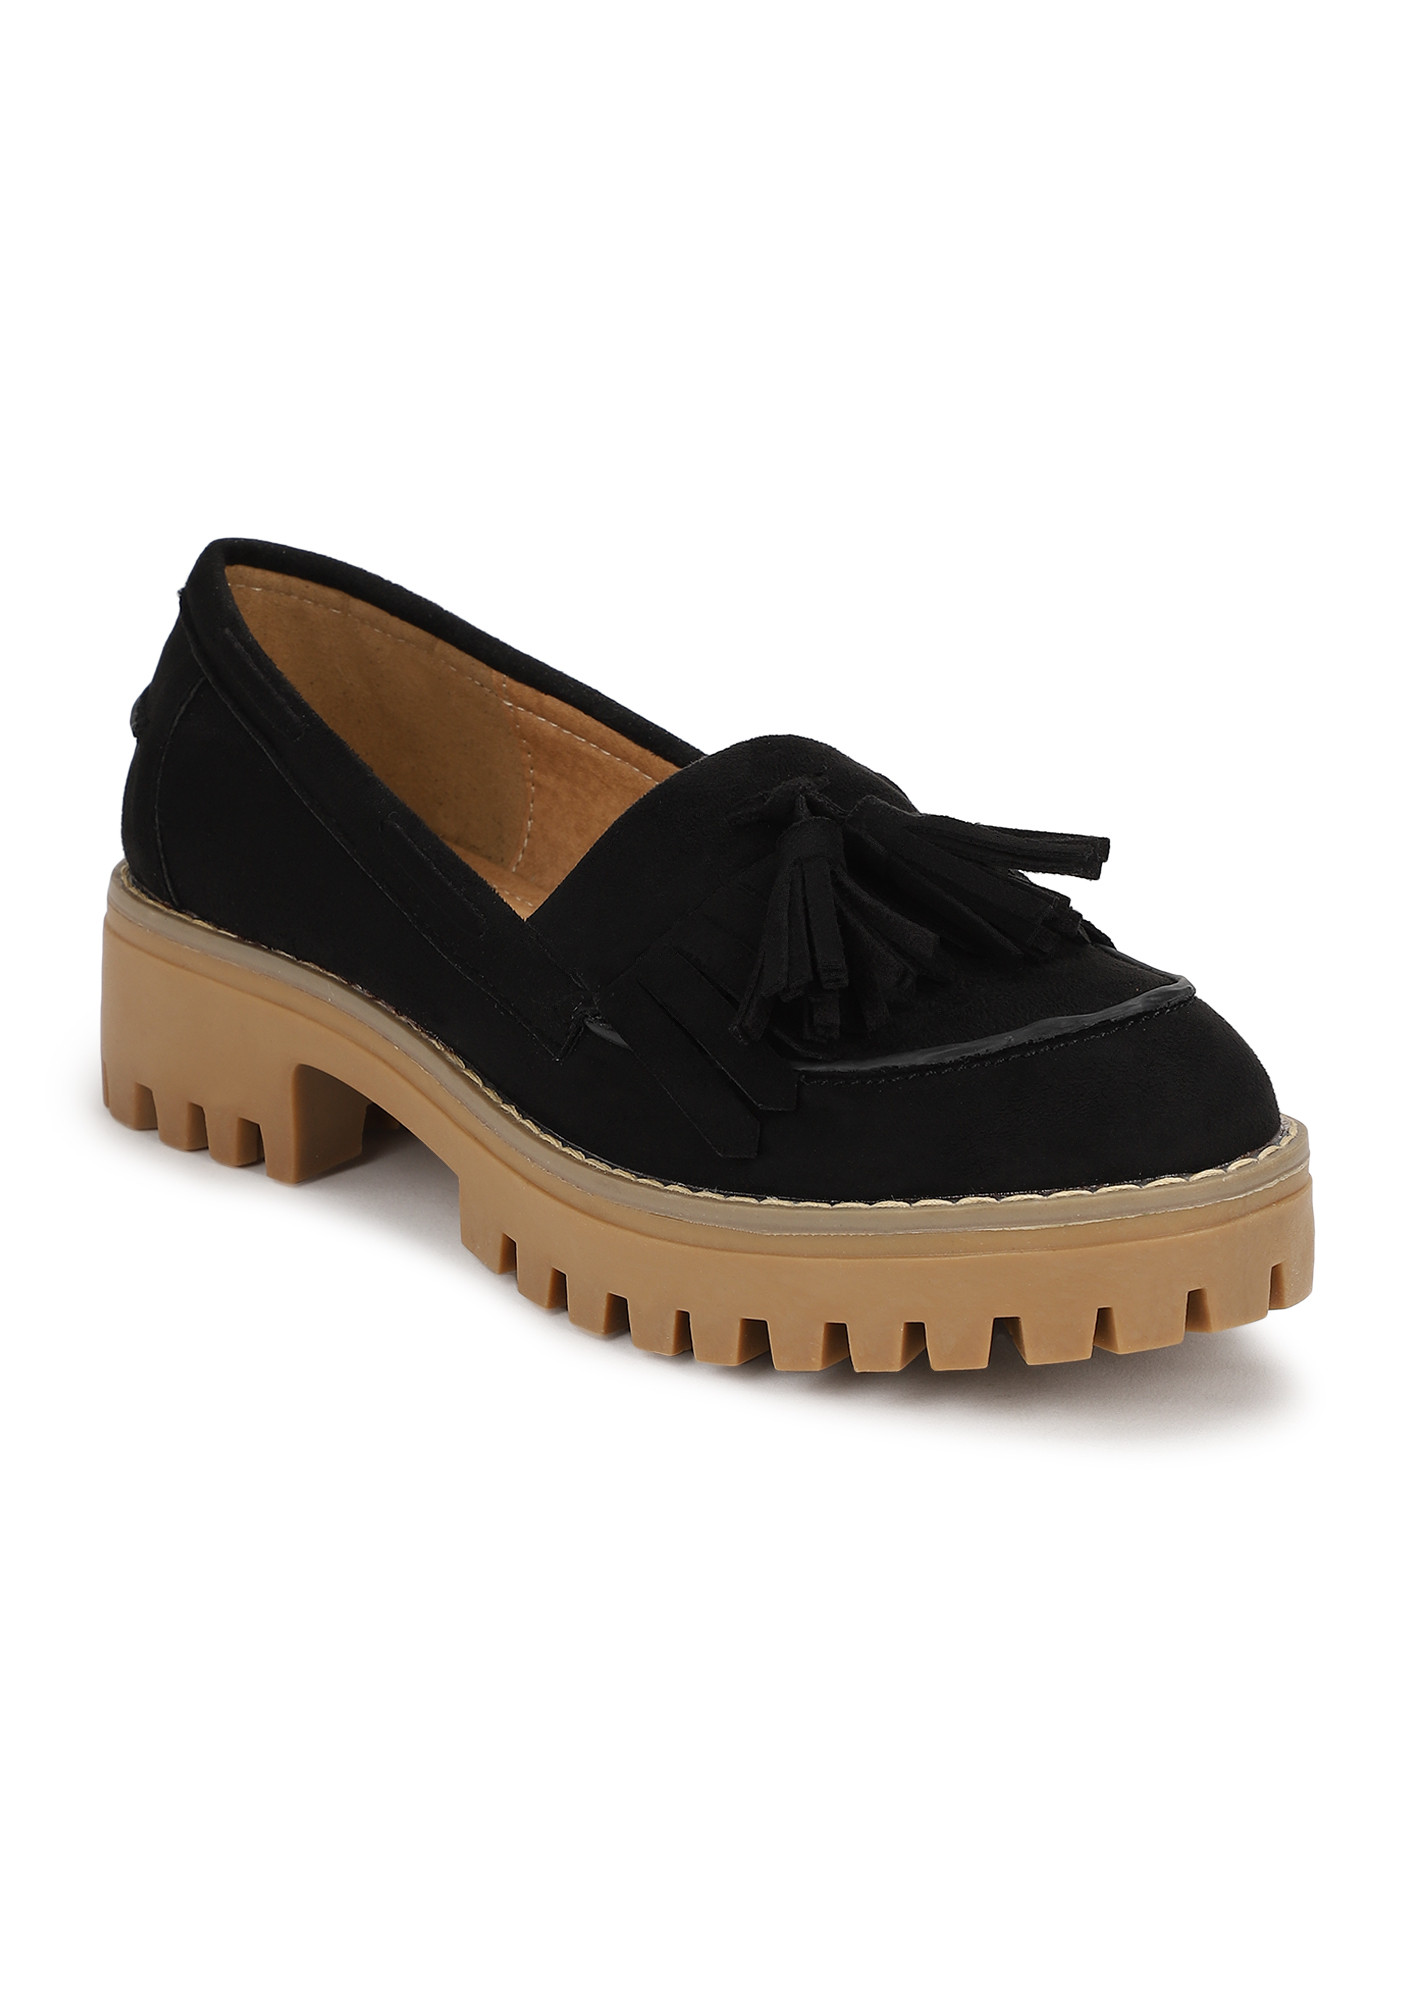 ON-DUTY PERFECT BLACK LOAFERS